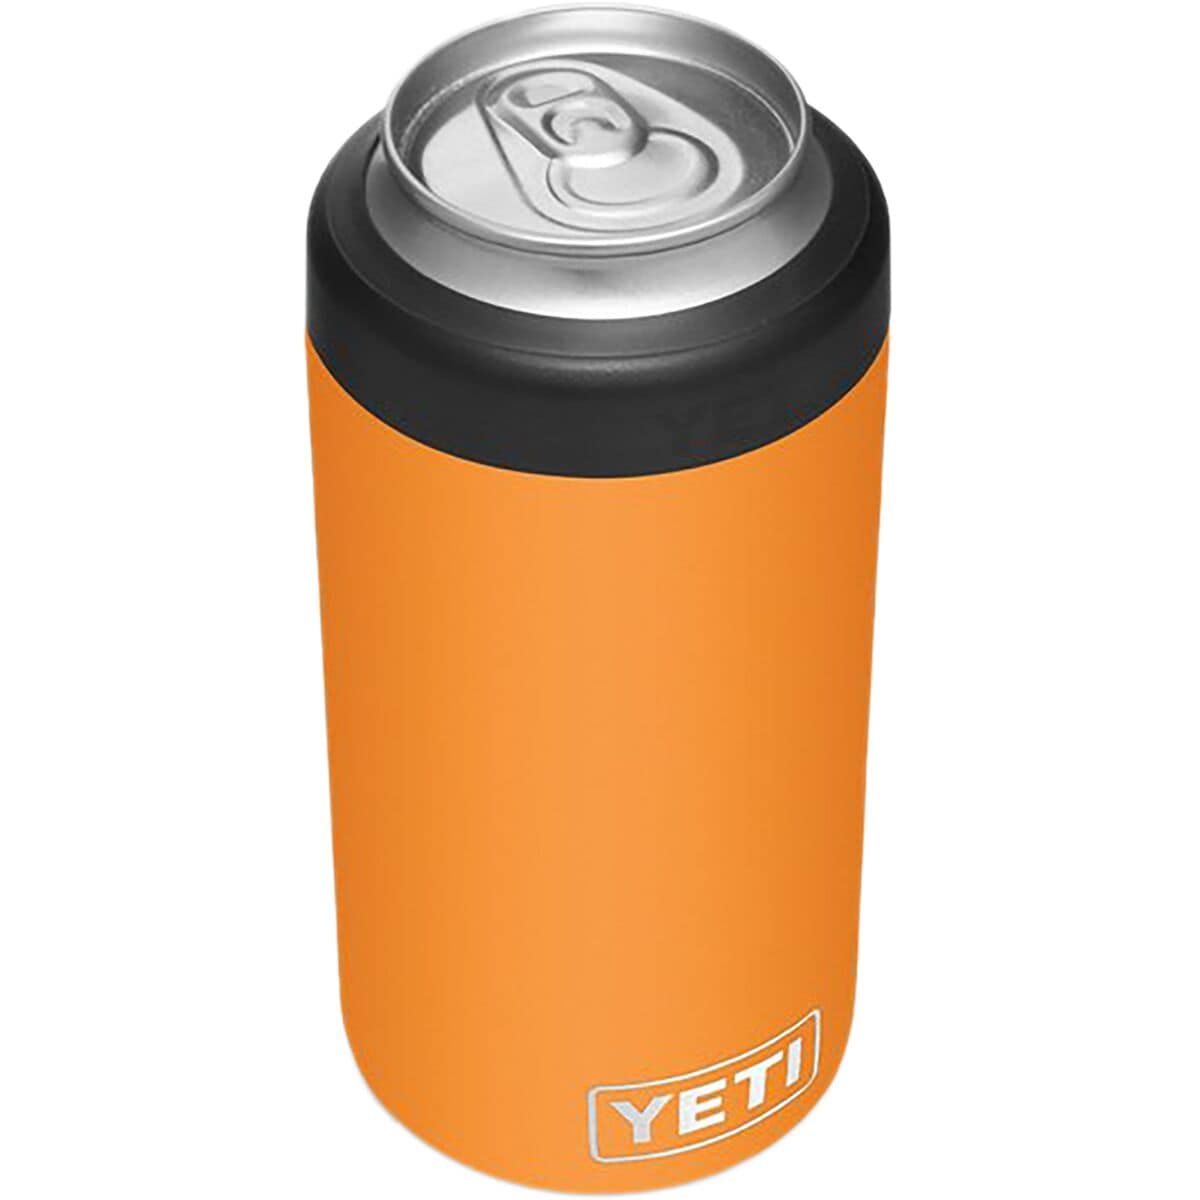 SDHQ Outdoor Division Yeti Rambler 16 oz. Colster Tall Can Insulator